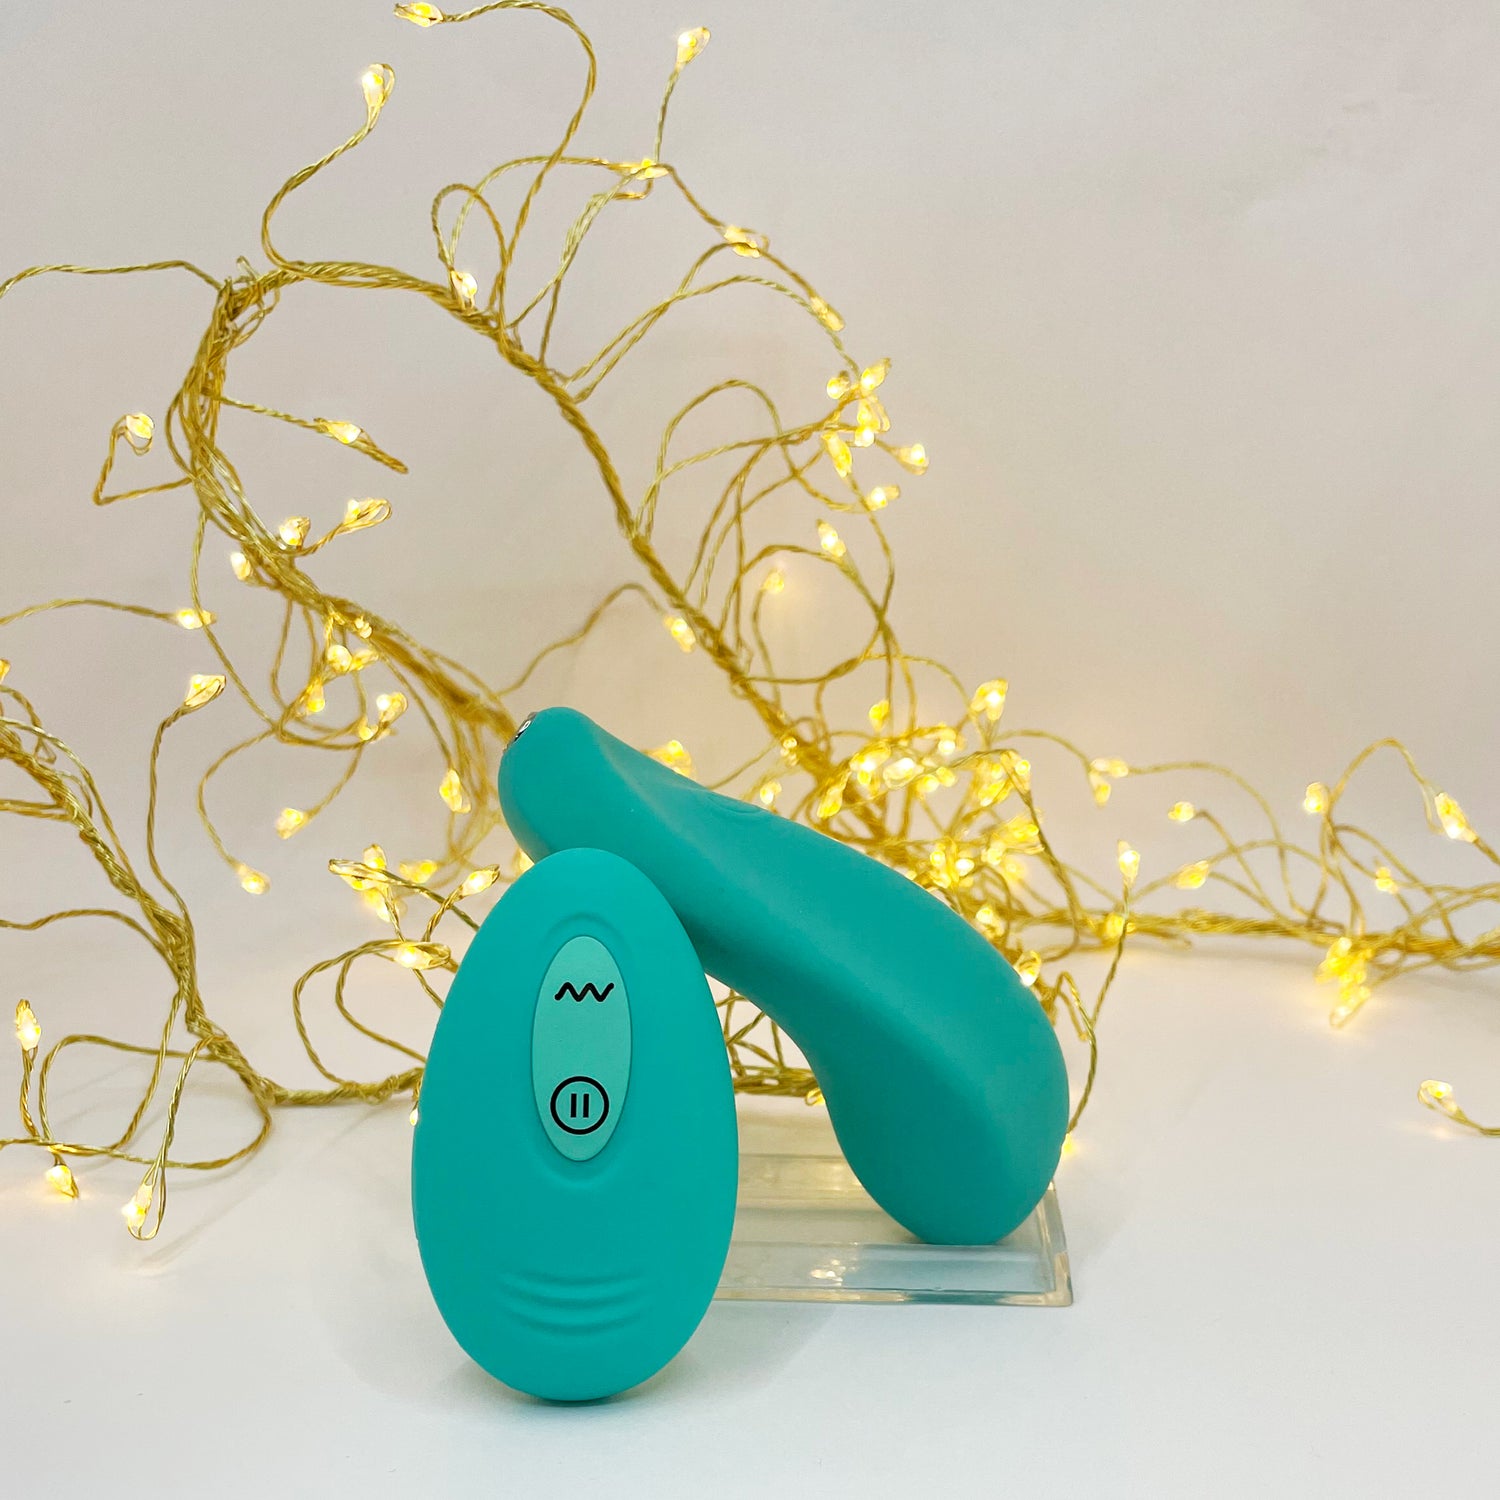 remote control vibrator with fairy lights